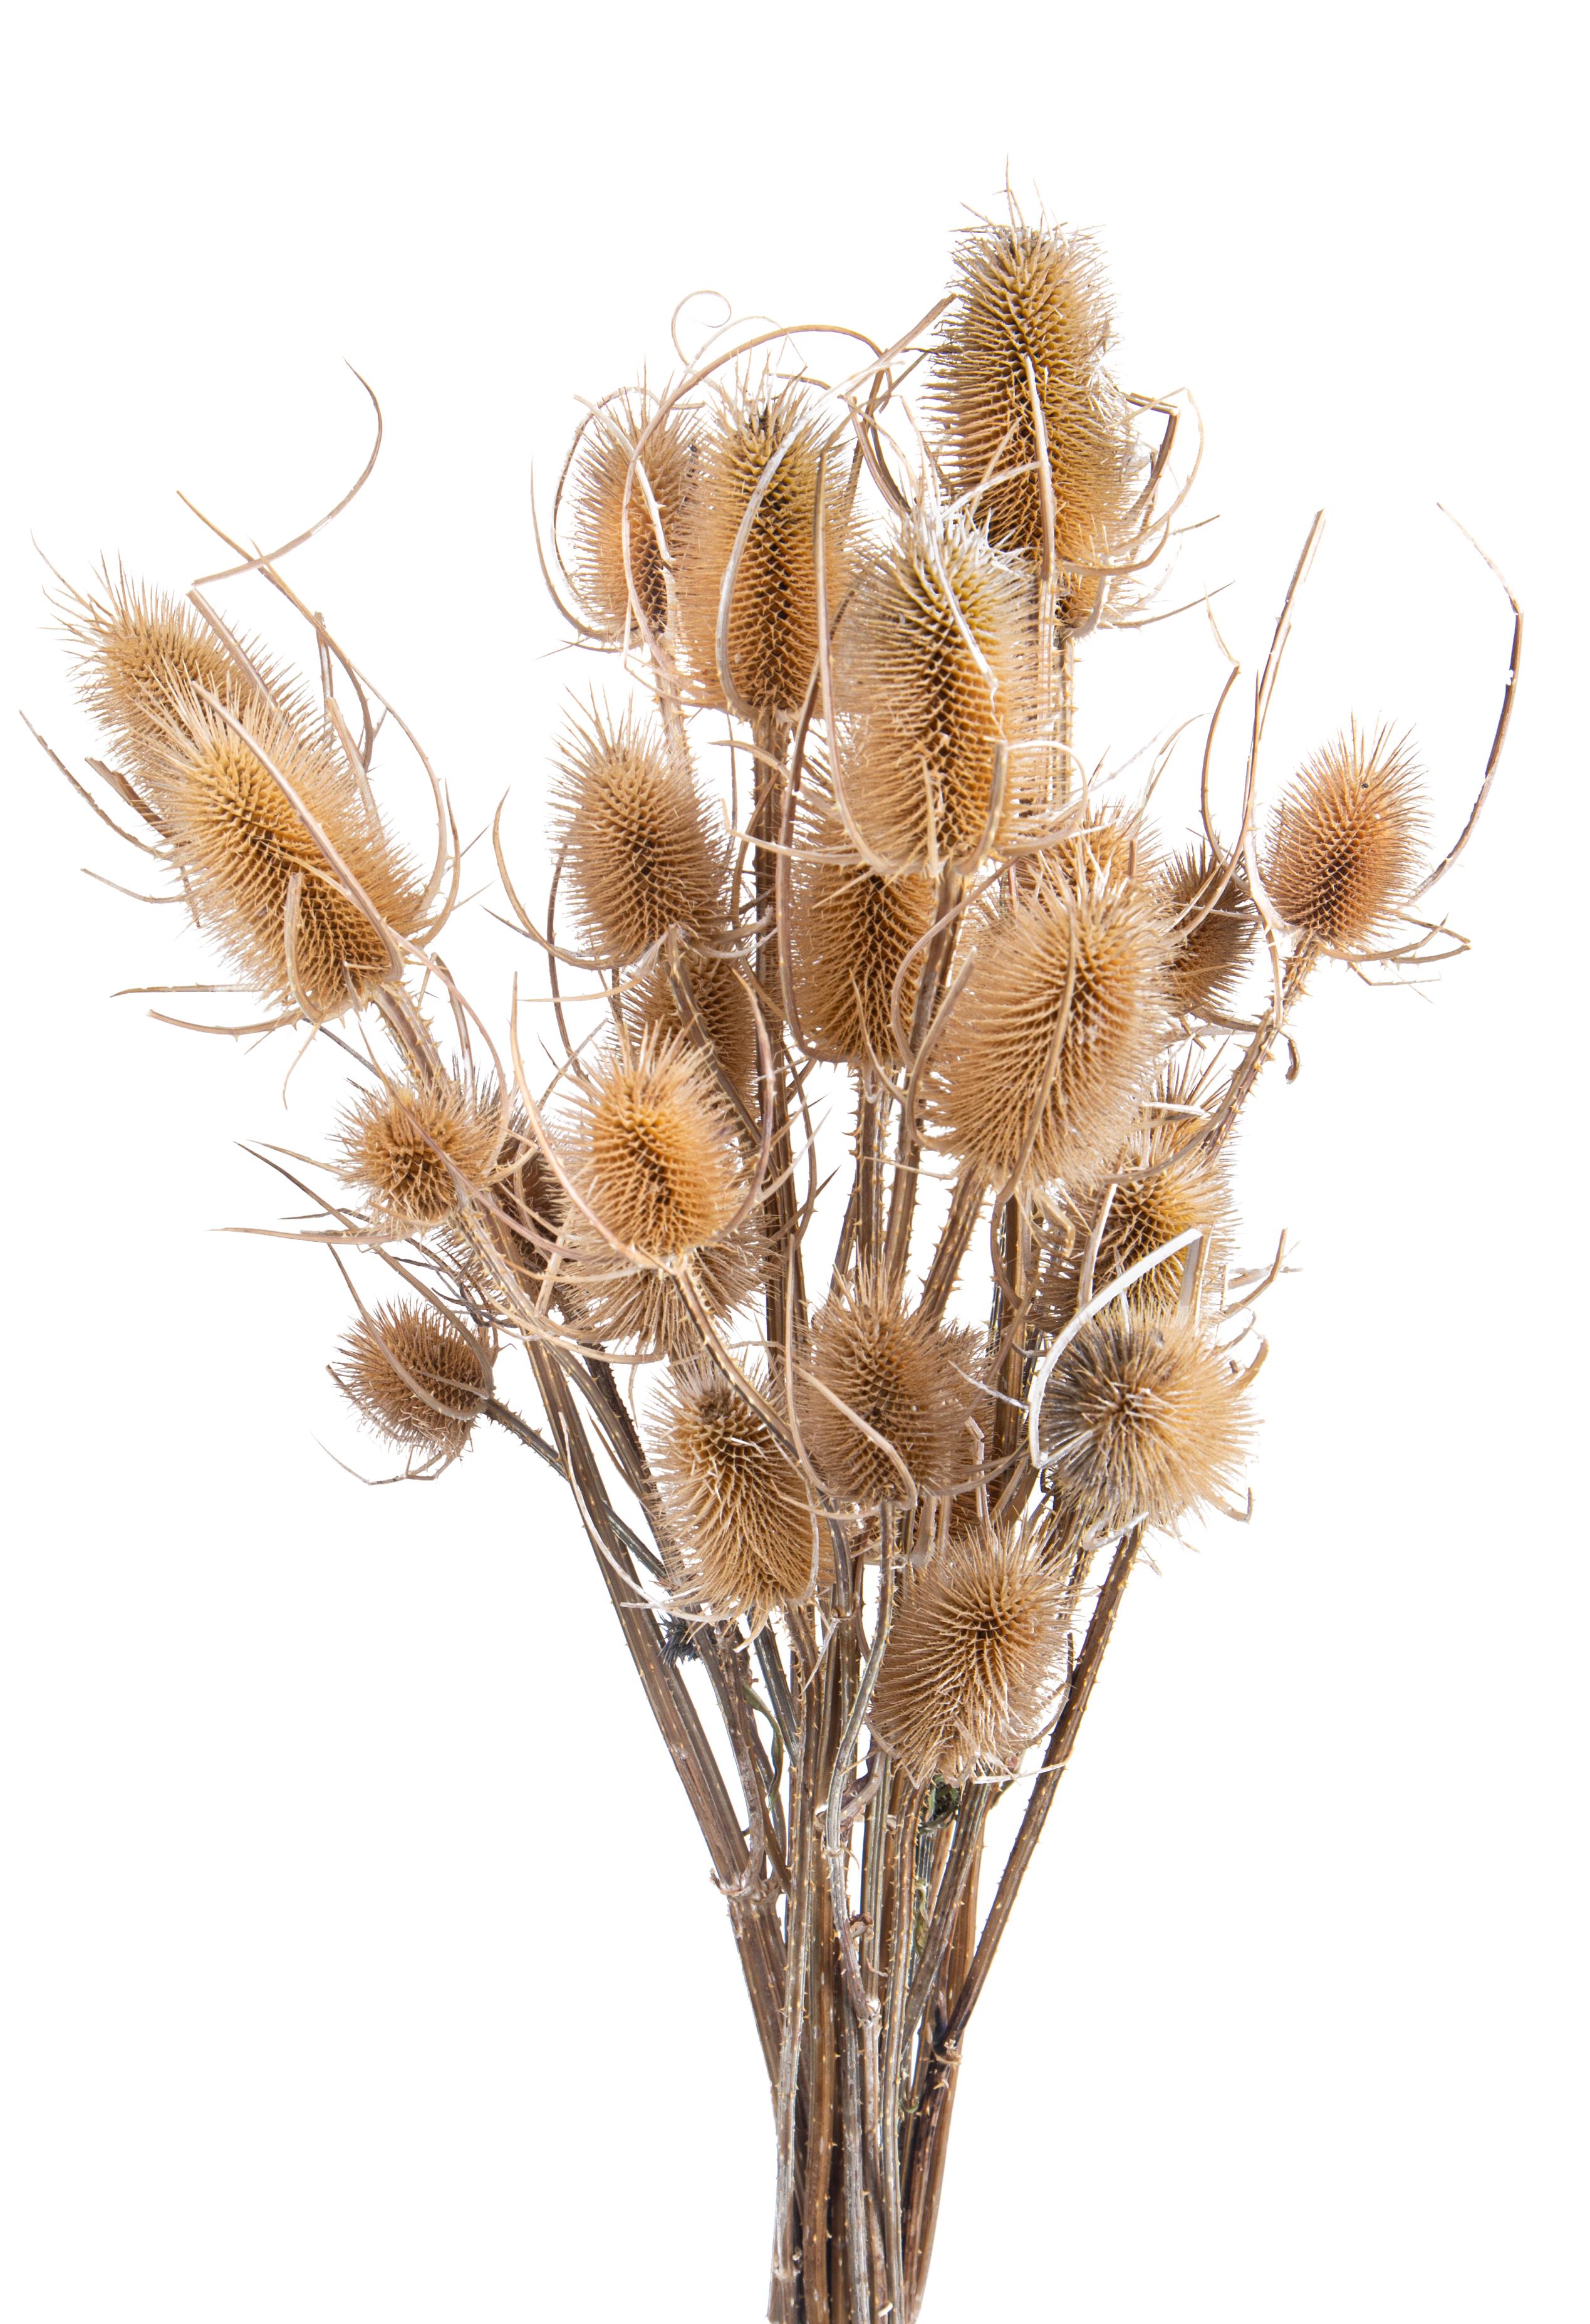 SPRING AND EASTER DECORATIONS,SPRING/SUMMER DECORATIONS,CARDI PALUSTRI DIPSACUS NATURALE